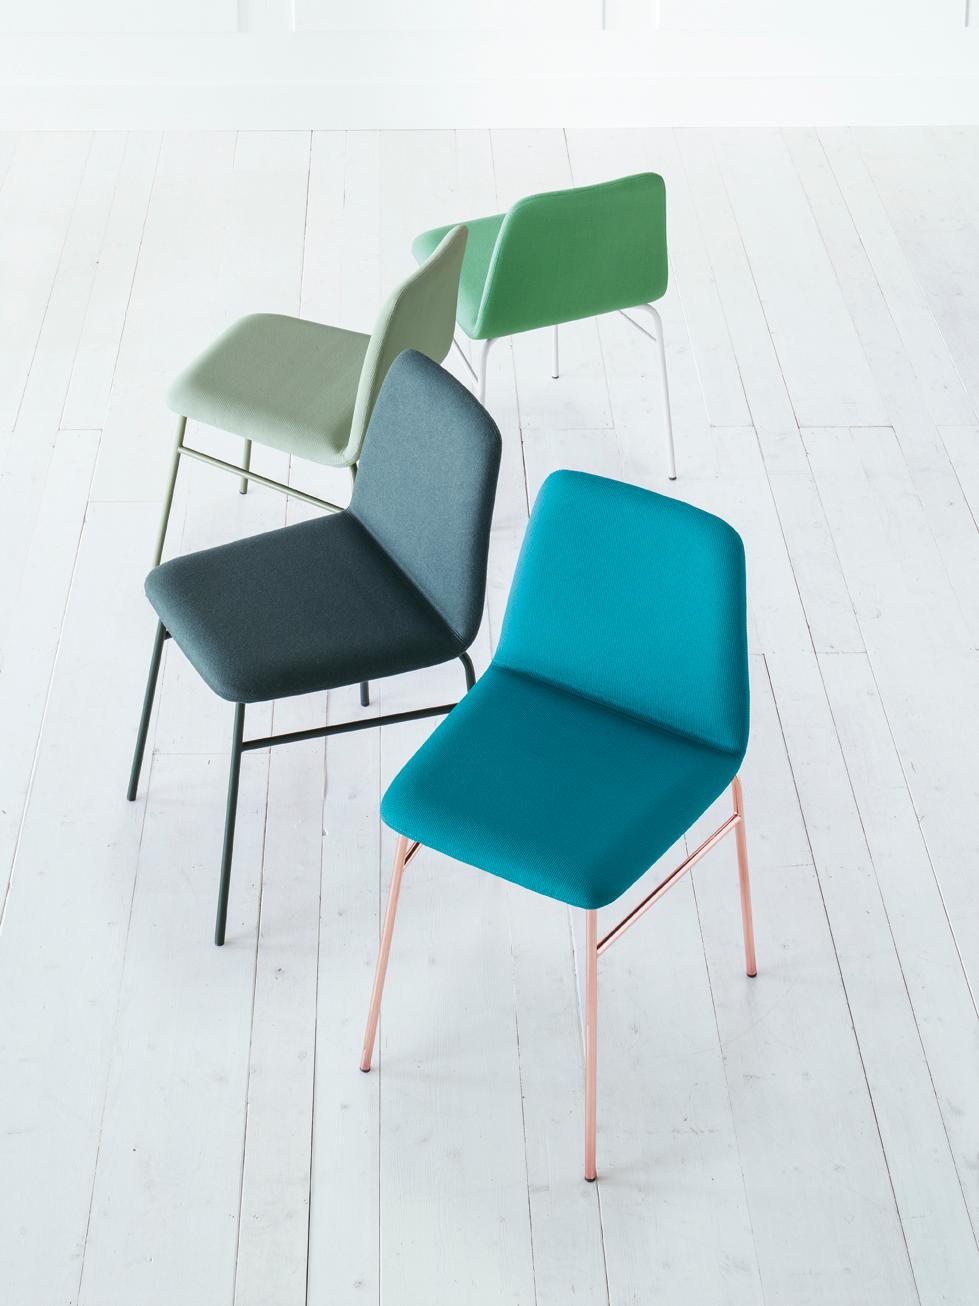 BARDOT MET stands out for its elegance and brightness, extending its style to include new frames, pastel and vibrant shades, and refined, contemporary finishes. The frame of the new chair and stool is lighter, through the use of clean-lined, metal